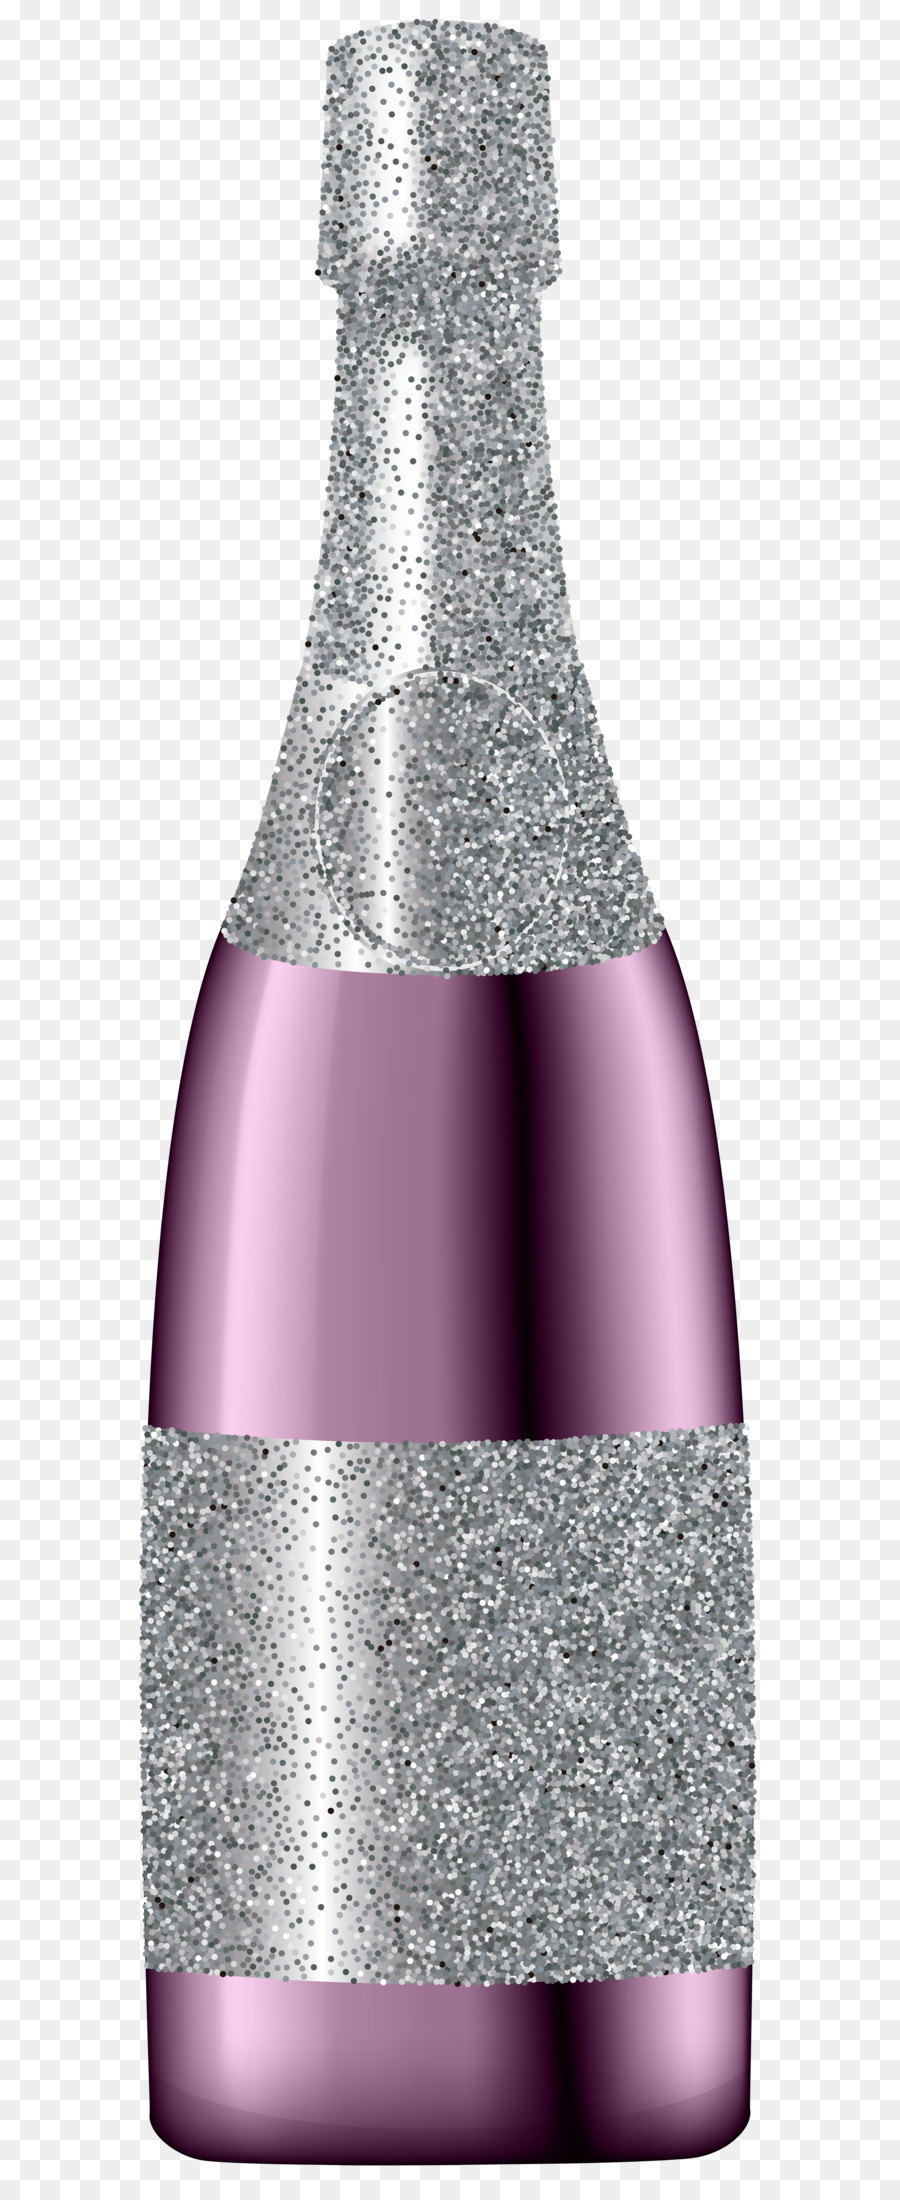 Champagne clipart pink champagne. Red wine cocktail clip